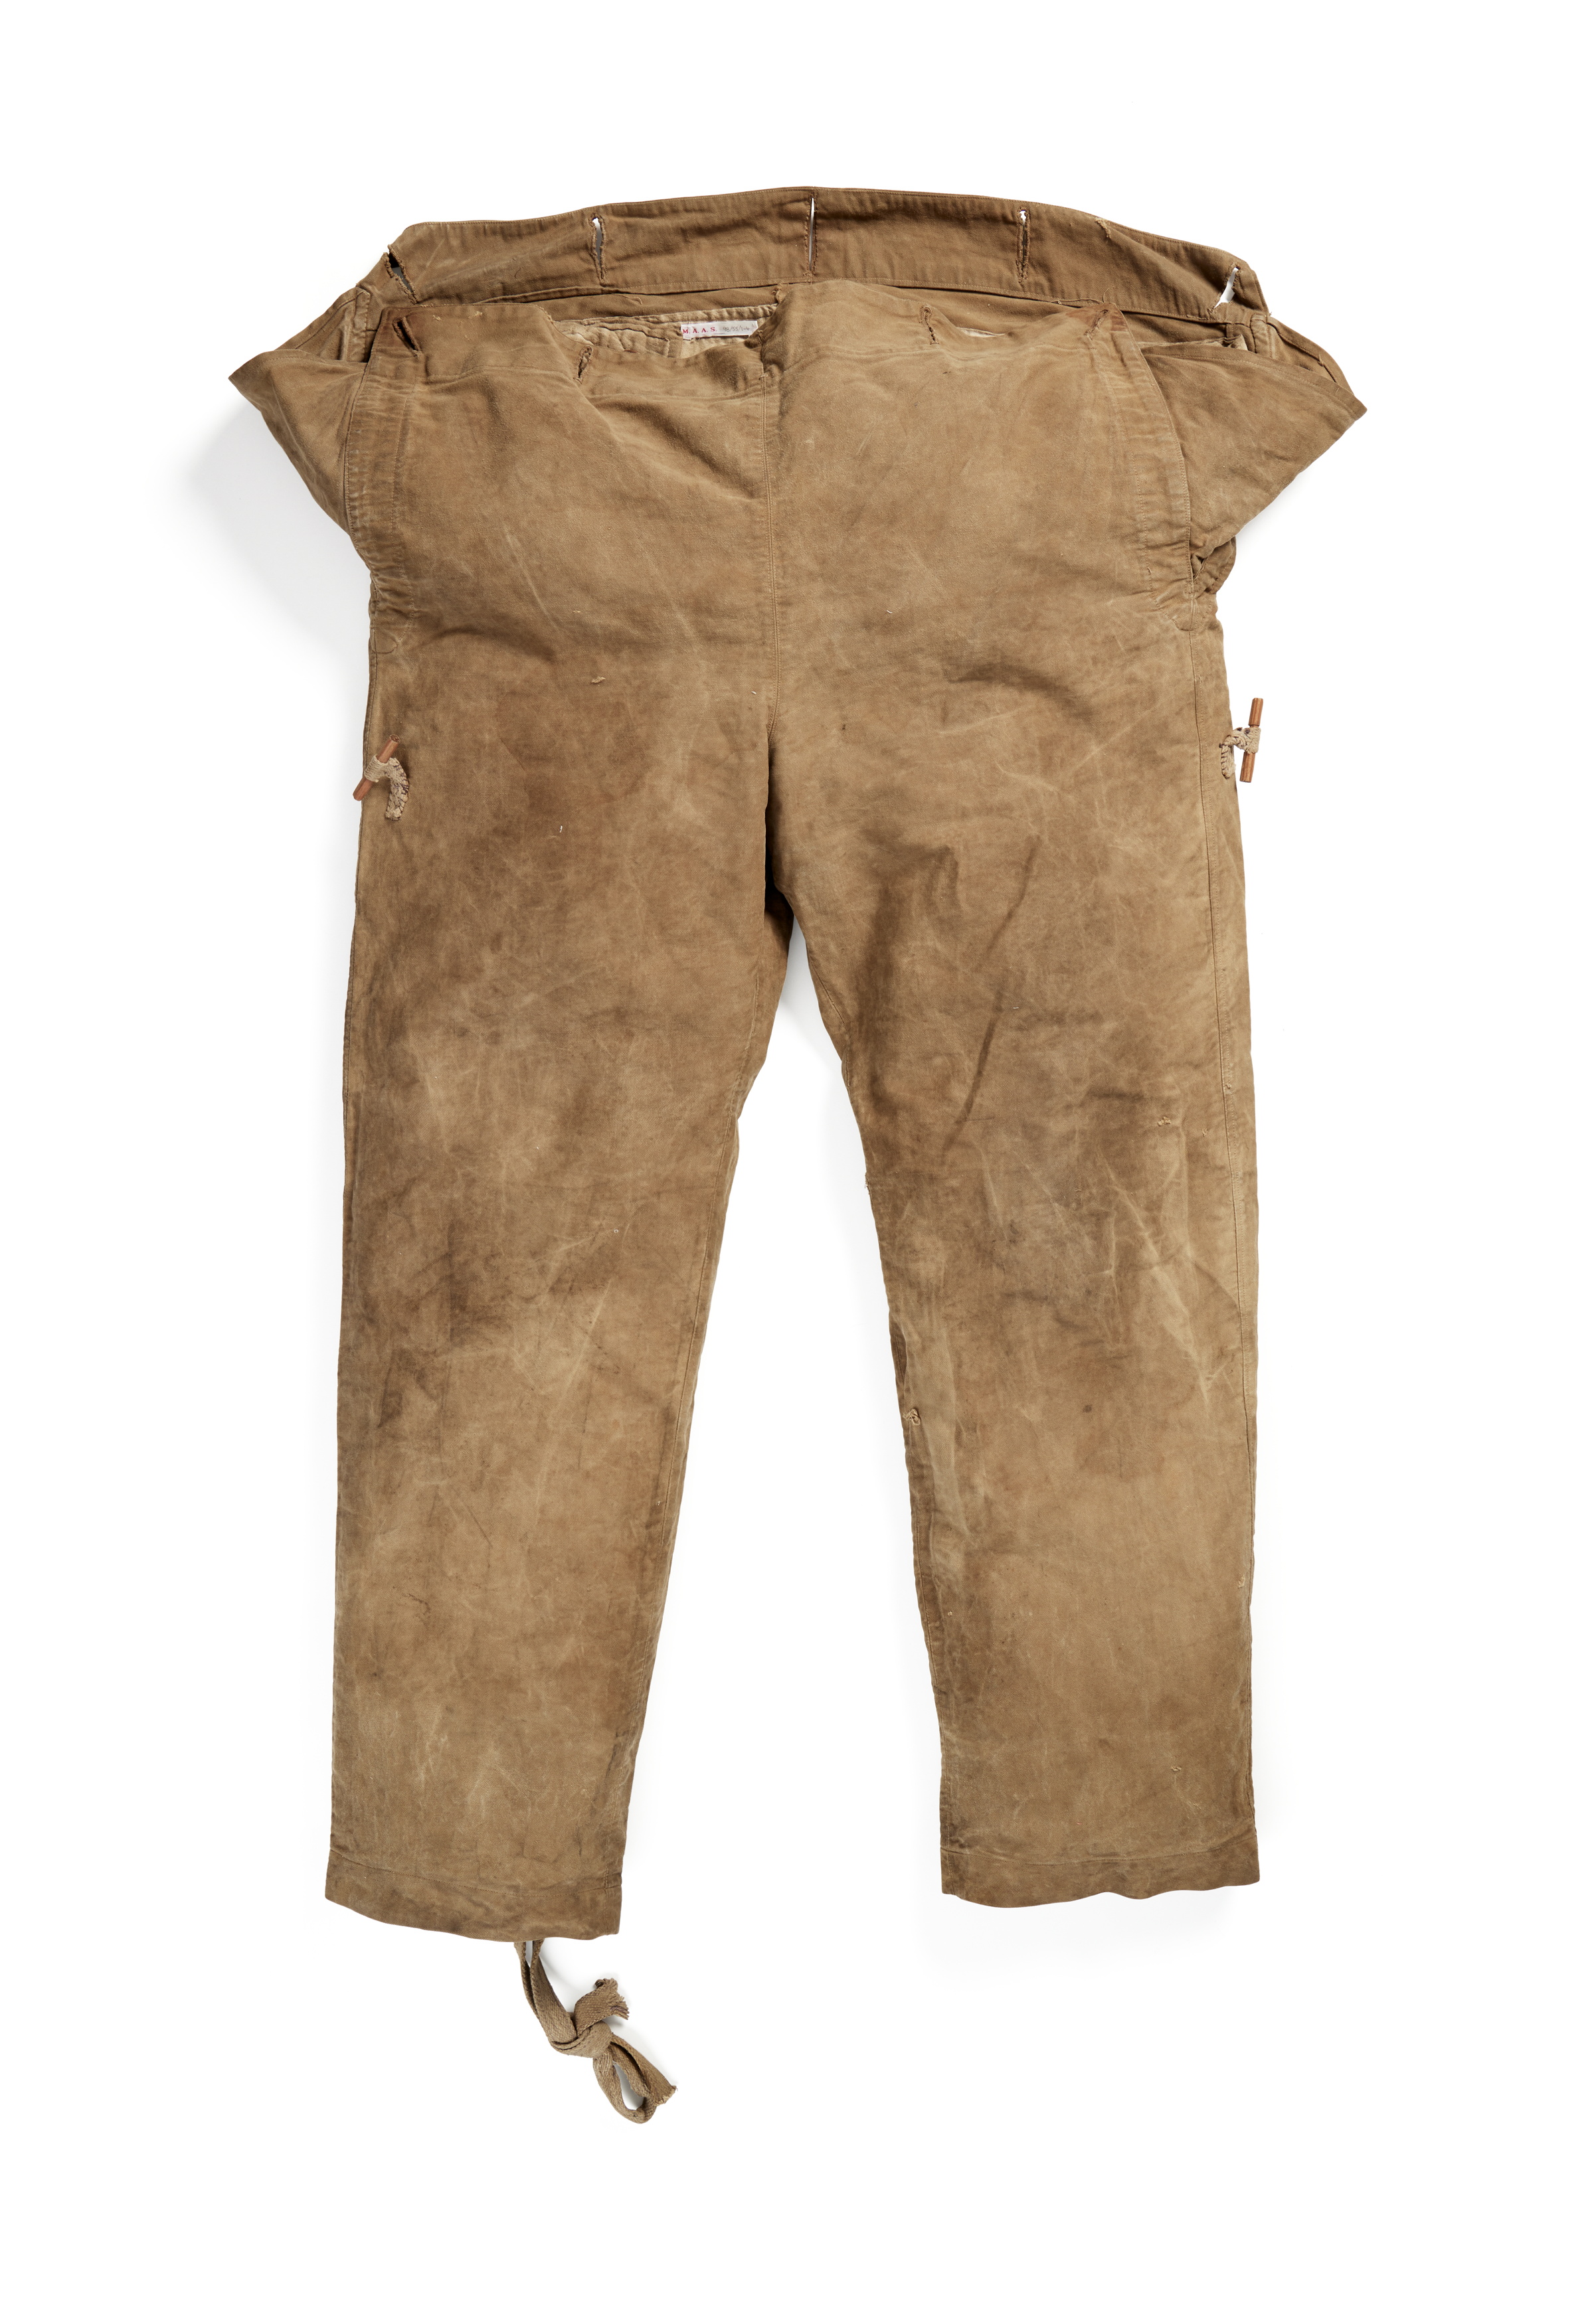 Trousers worn by Charles Laseron during Mawsons Australasian Antarctic Expedition